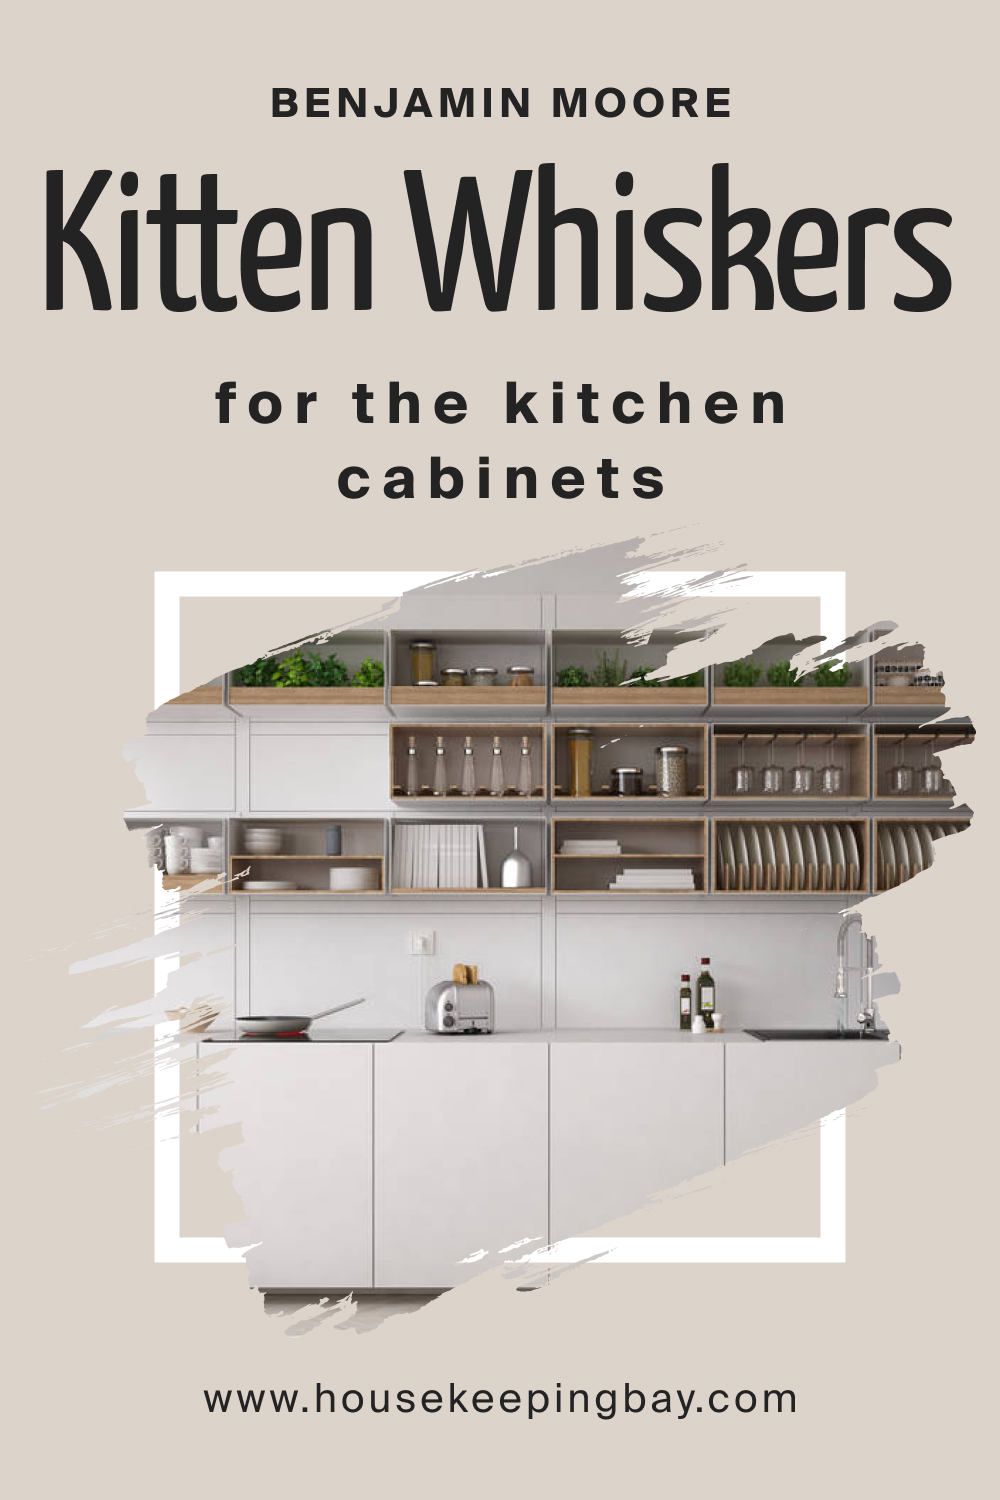 How to Use BM Kitten Whiskers 1003 on the Kitchen Cabinets?